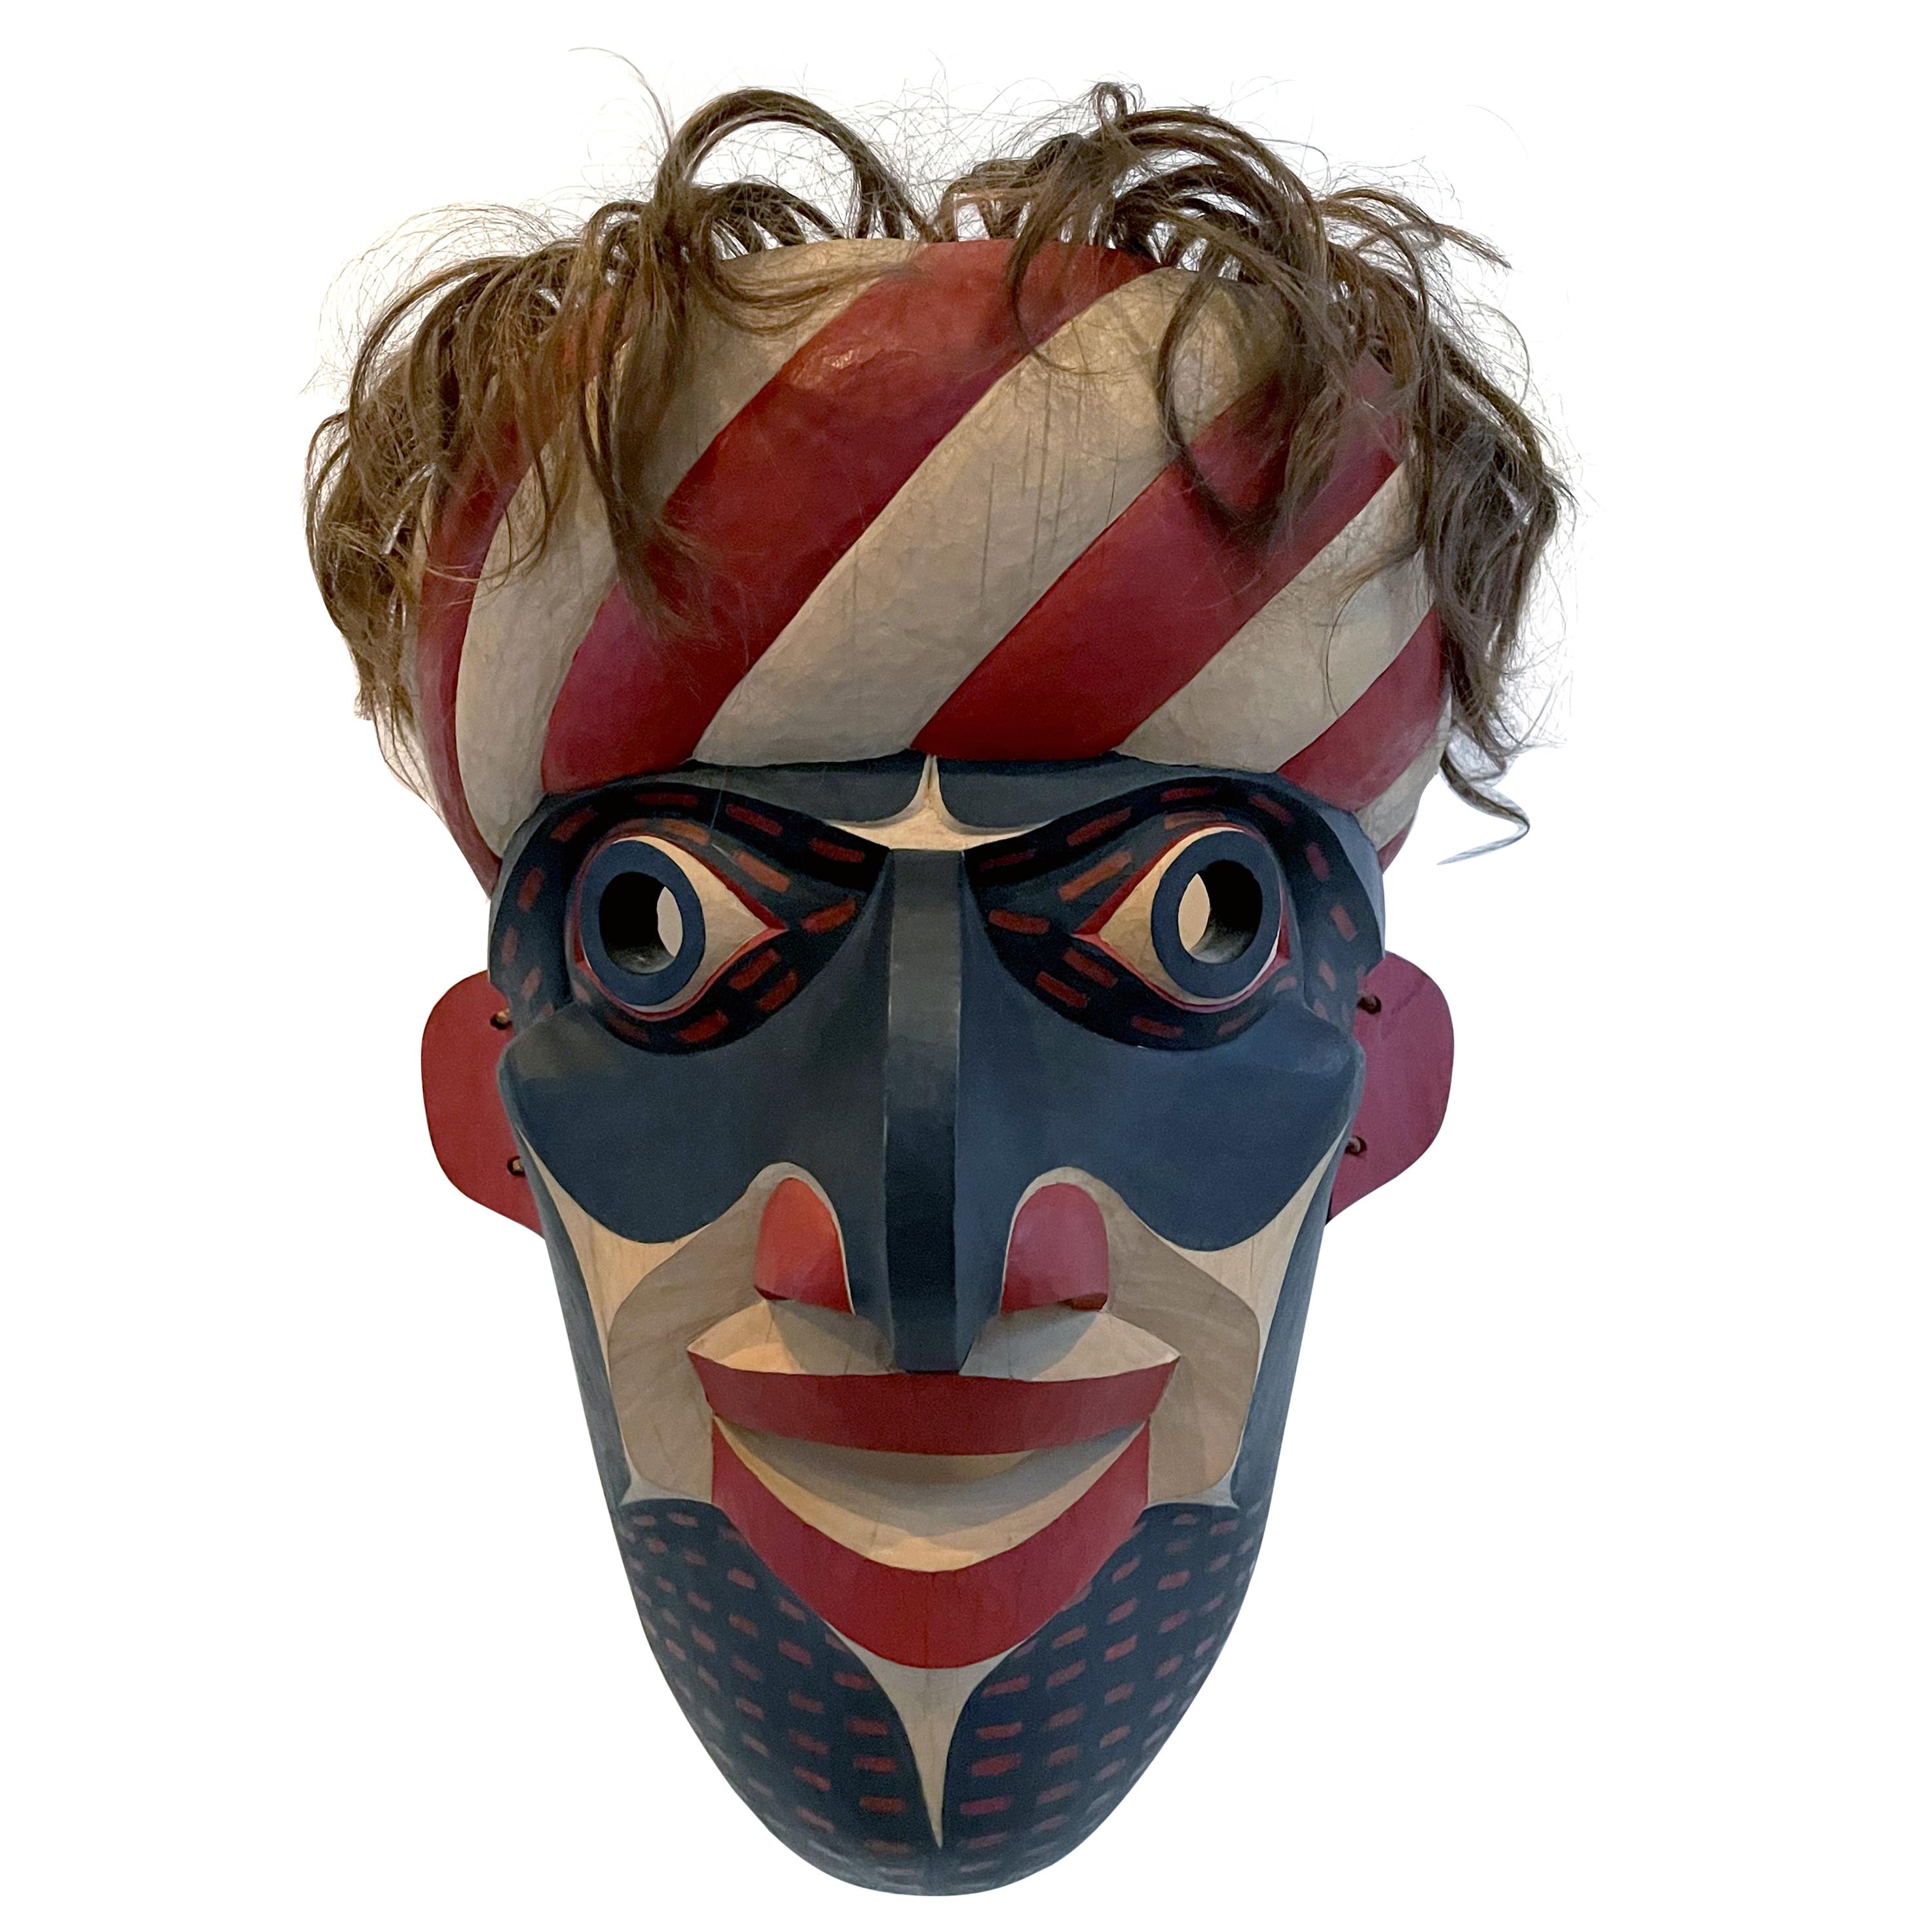 Carved Tribal Mask from Pacific Northwest Coast by David Frankel